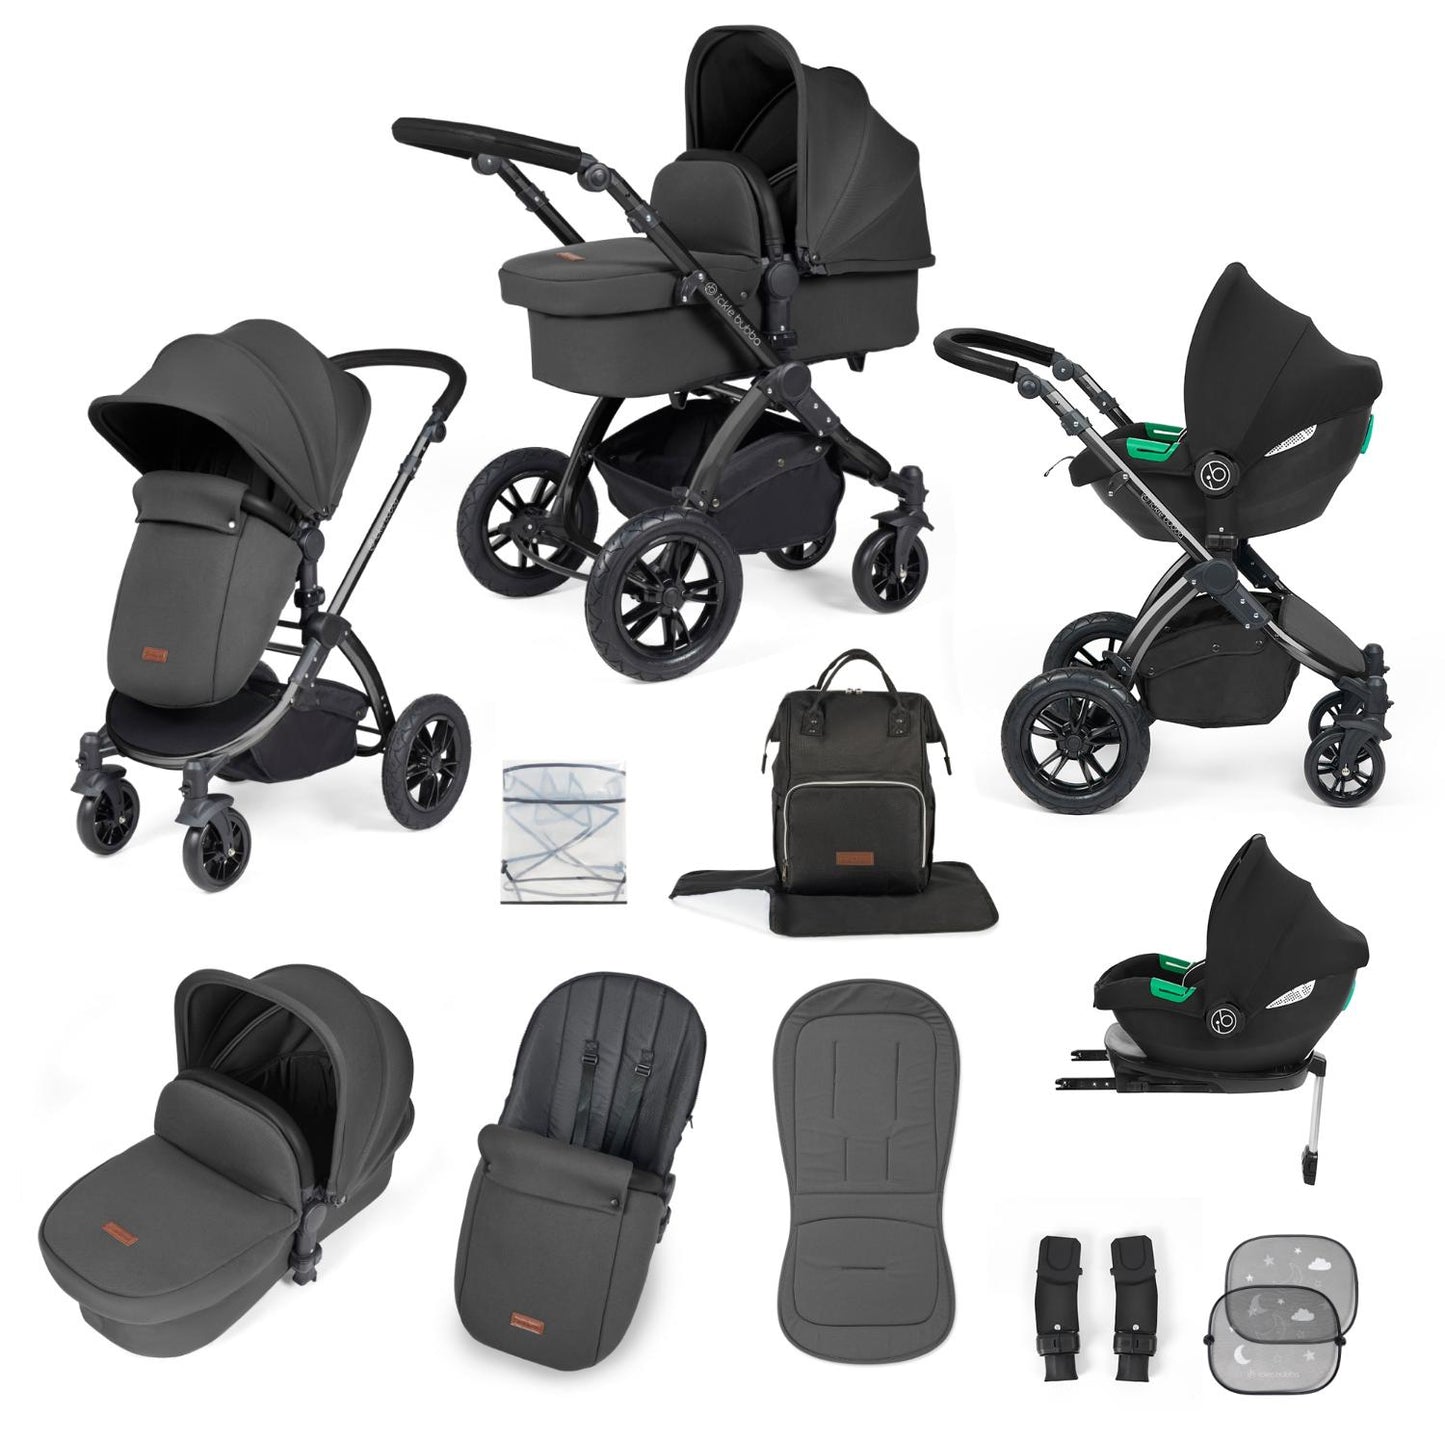 Ickle Bubba Stomp Luxe All-in-One Travel System with Cirrus i-Size Car Seat and ISOFIX Base and accessories in Charcoal Grey colour